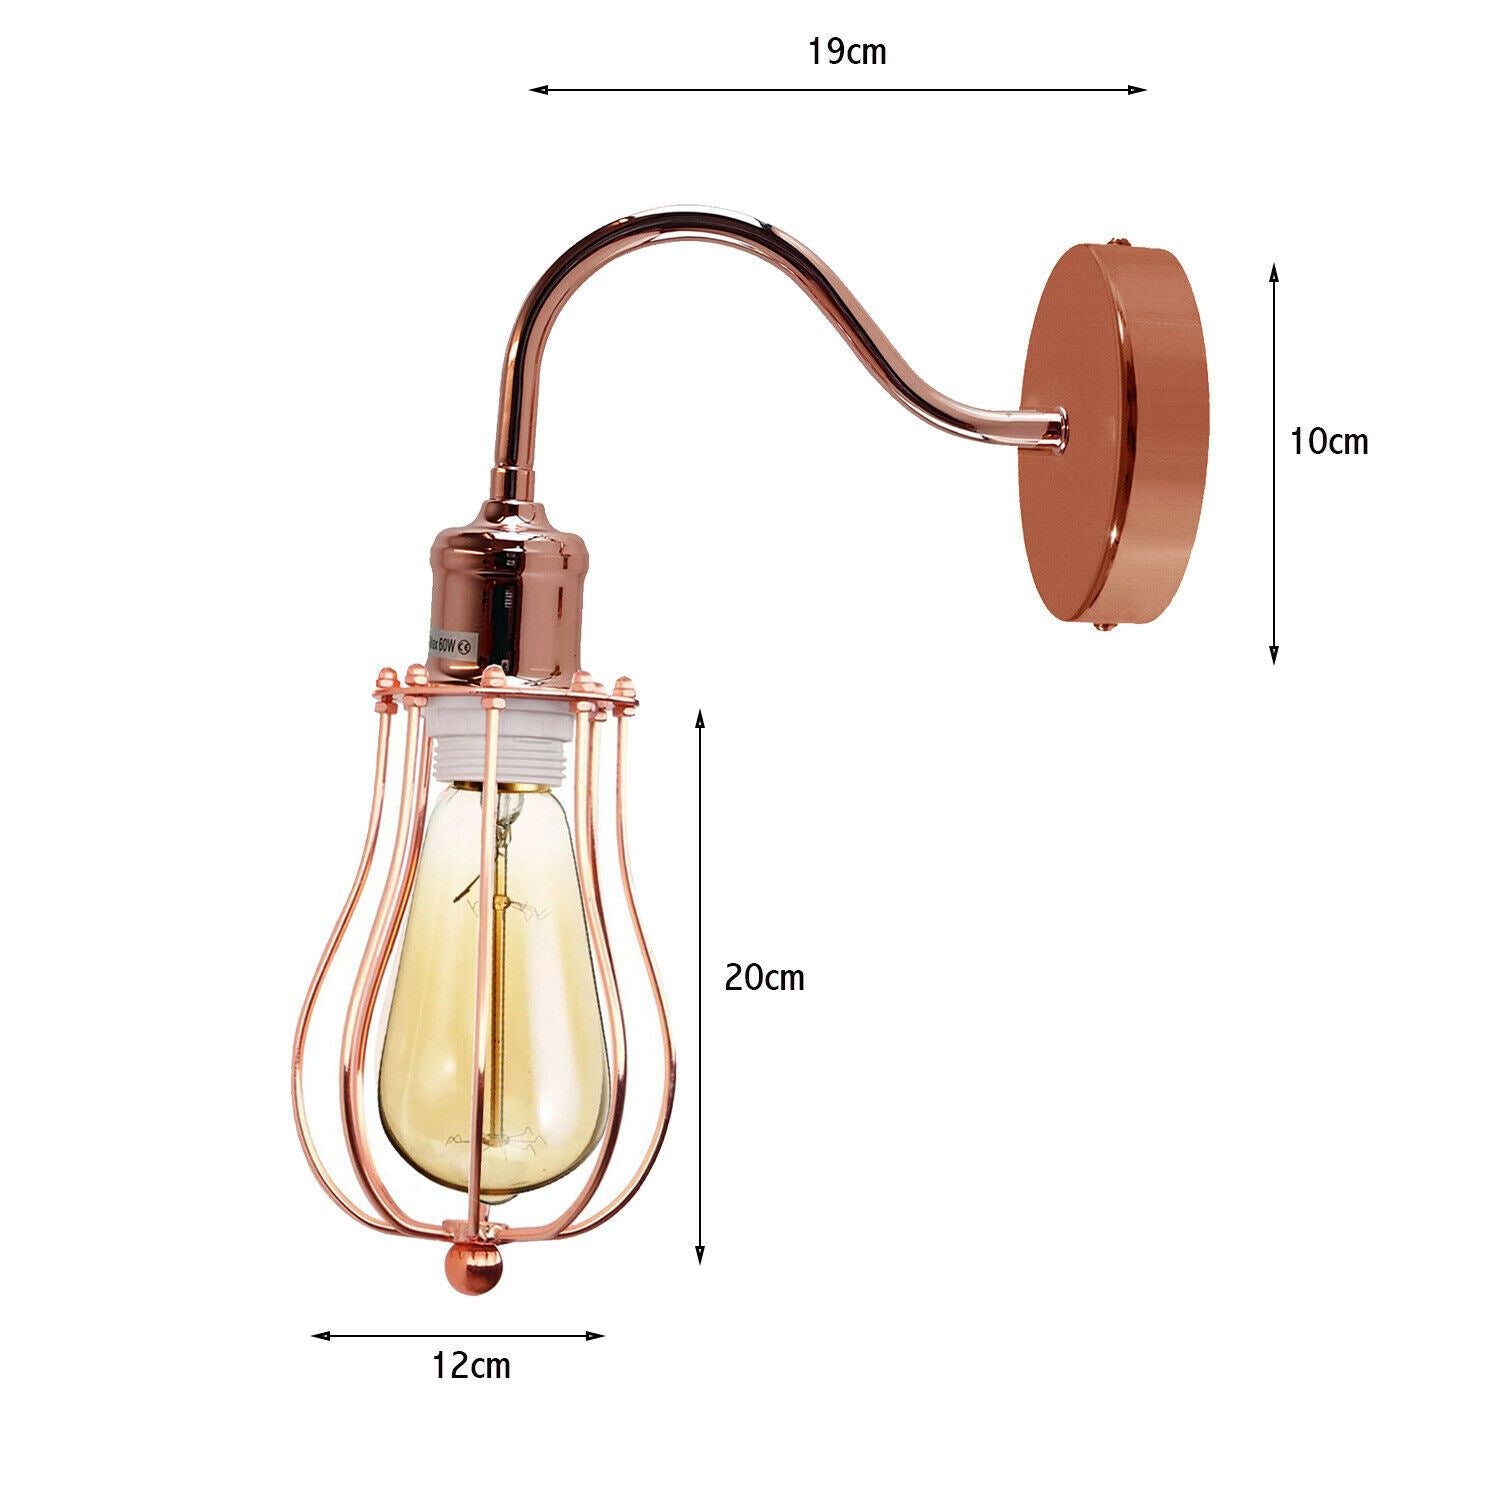 Modern Industrial Wall Mounted Light Indoor Rustic Sconce Lamp Fixture Metal Balloon Cage Shade for Bed room, Living Room Kitchen~1189 - LEDSone UK Ltd